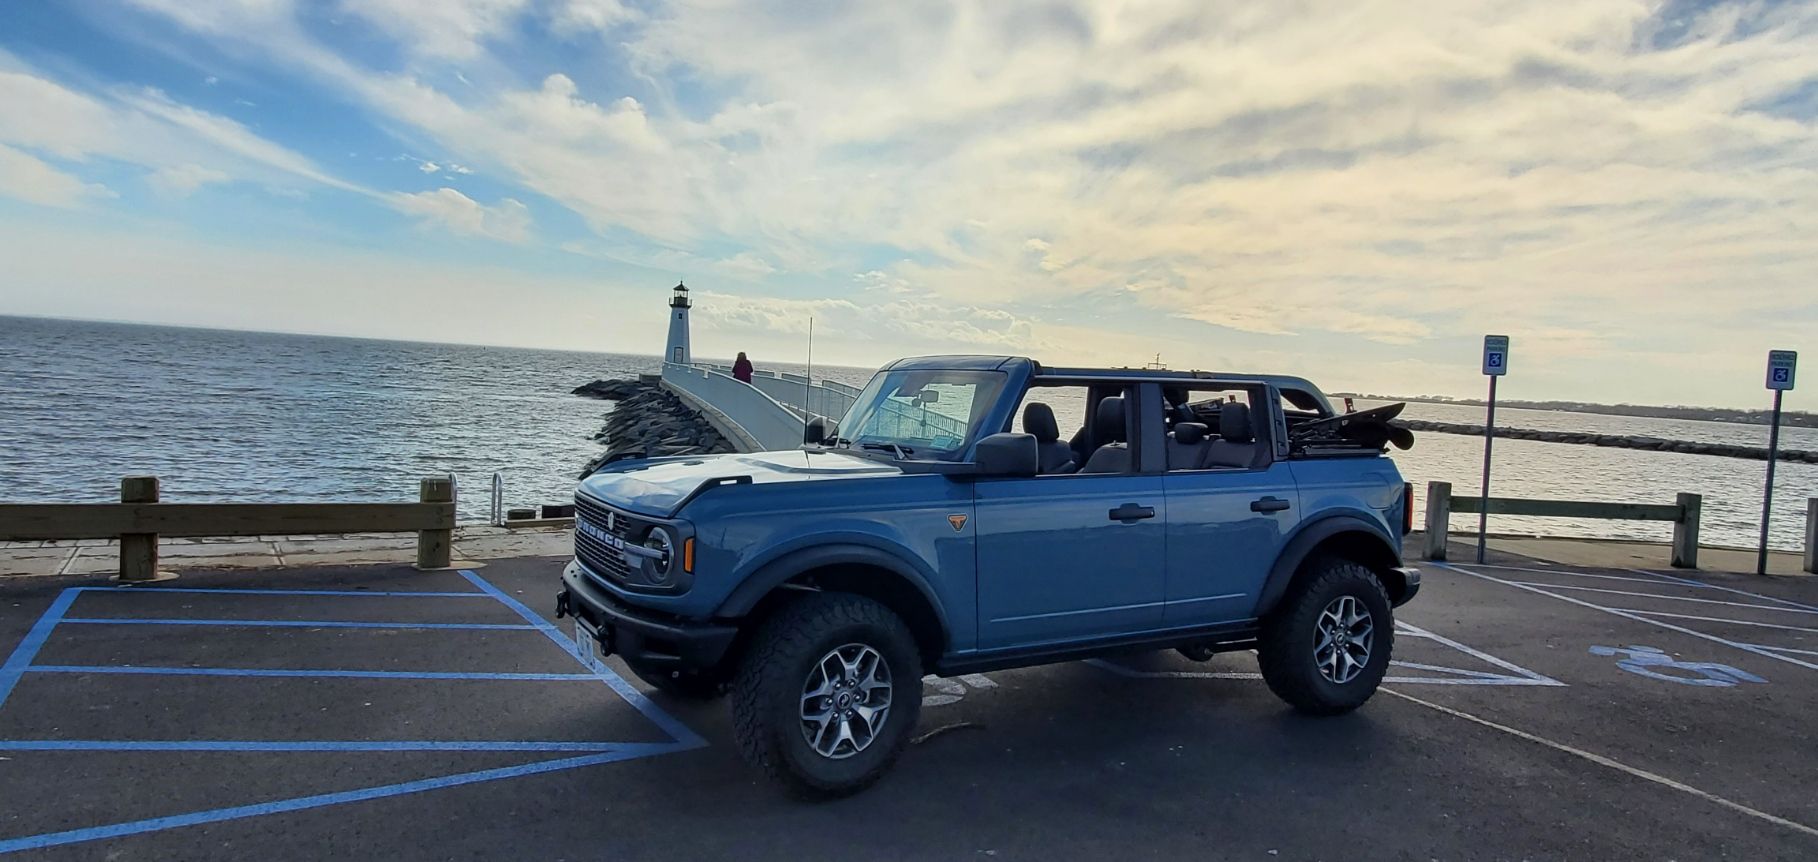 bronco by patchogue light house.jpg